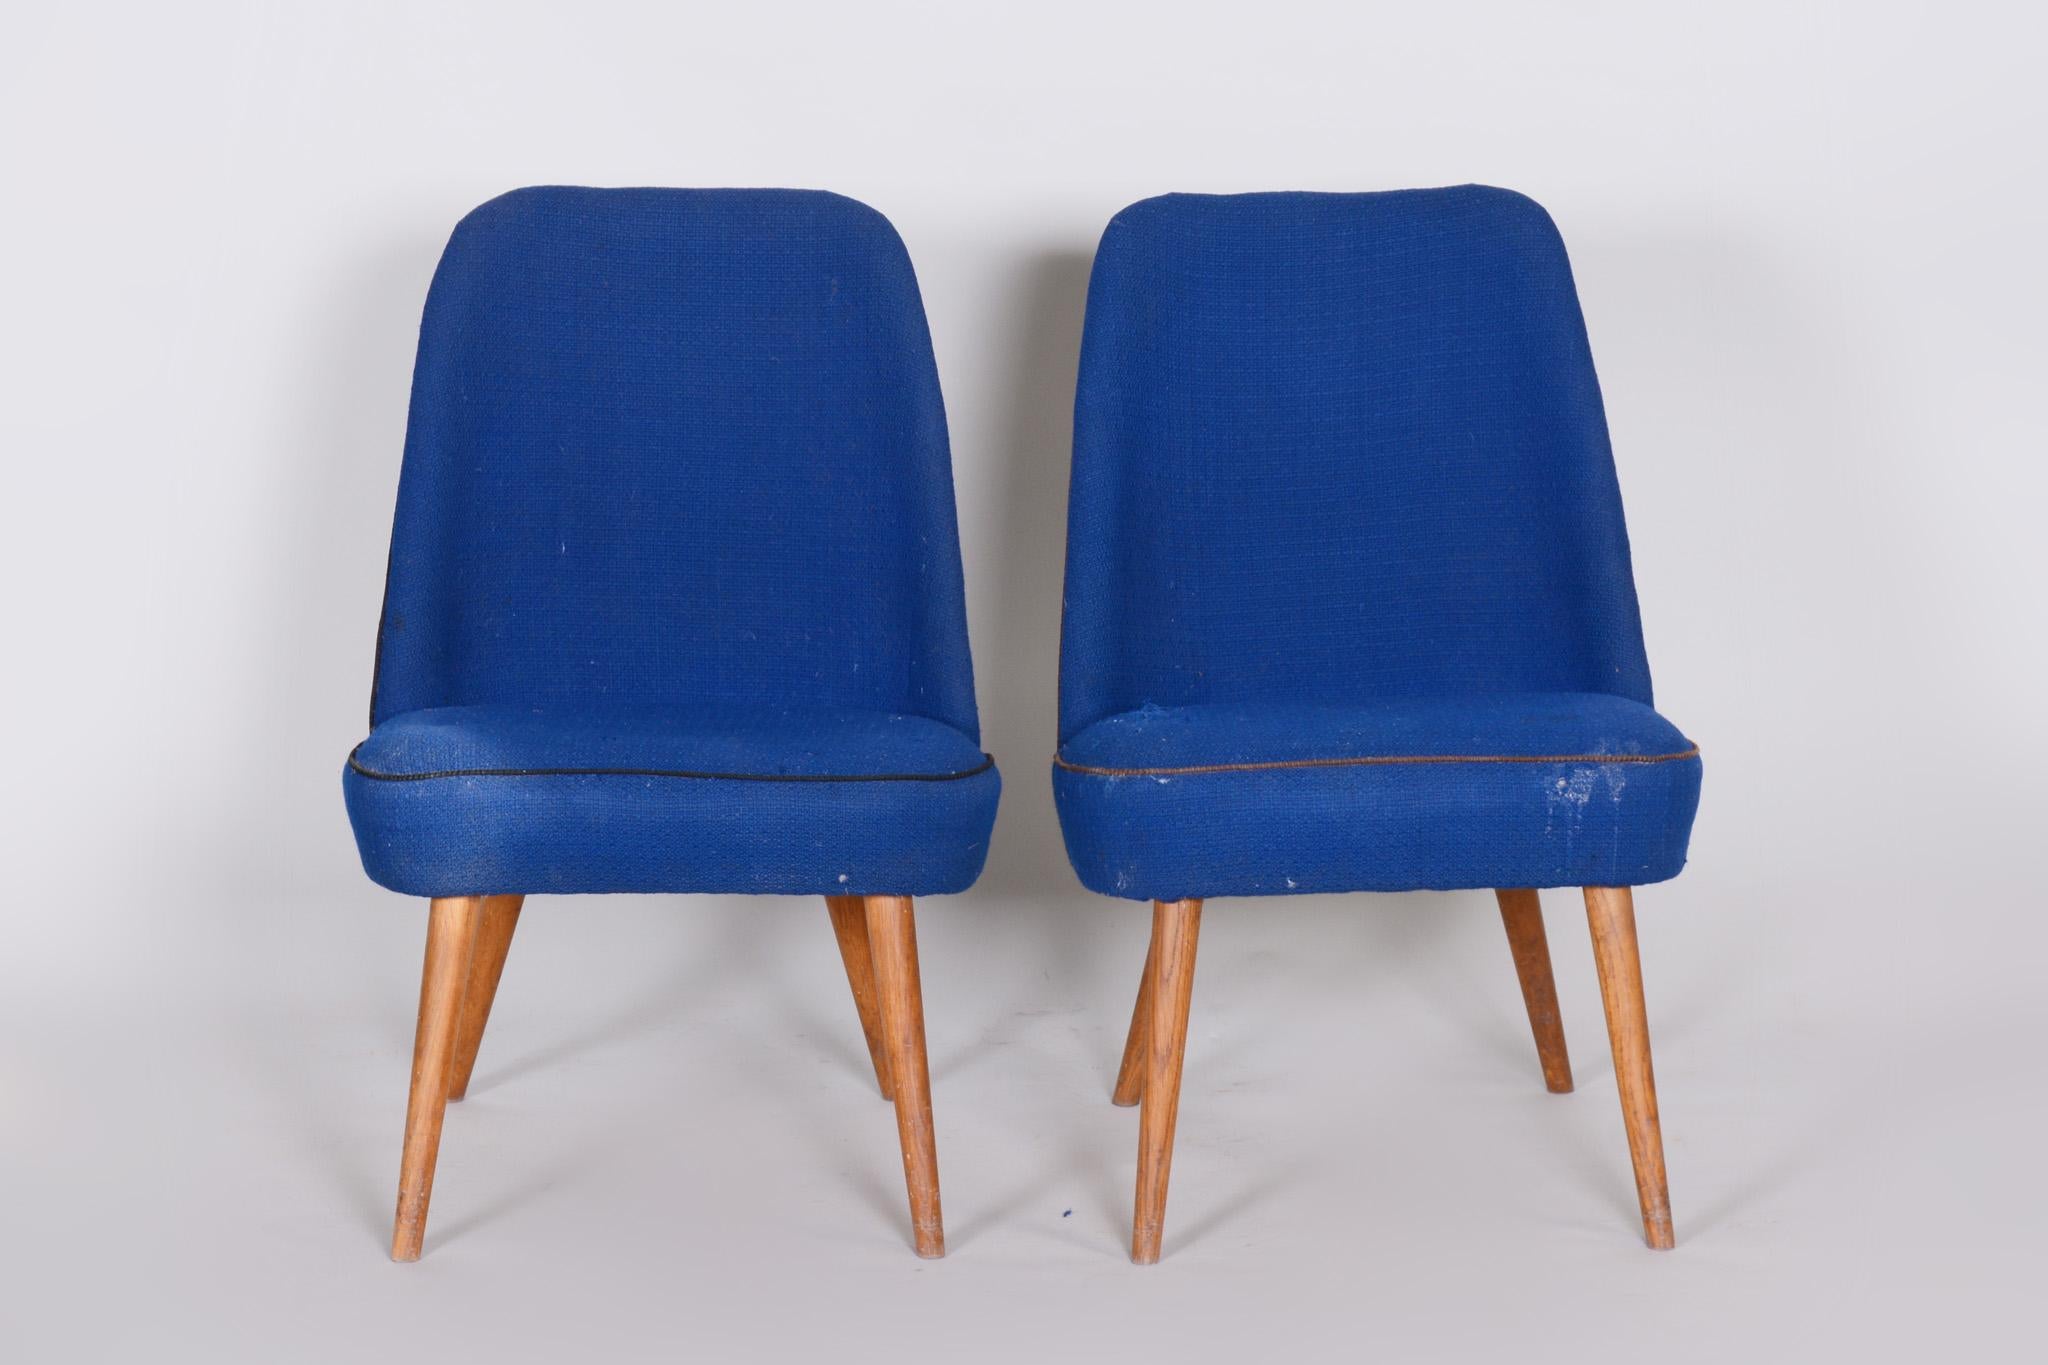 Pair of midcentury armchairs.
Original Condition
Source: Czechia
Material: Ash
Period: 1950-1959.





